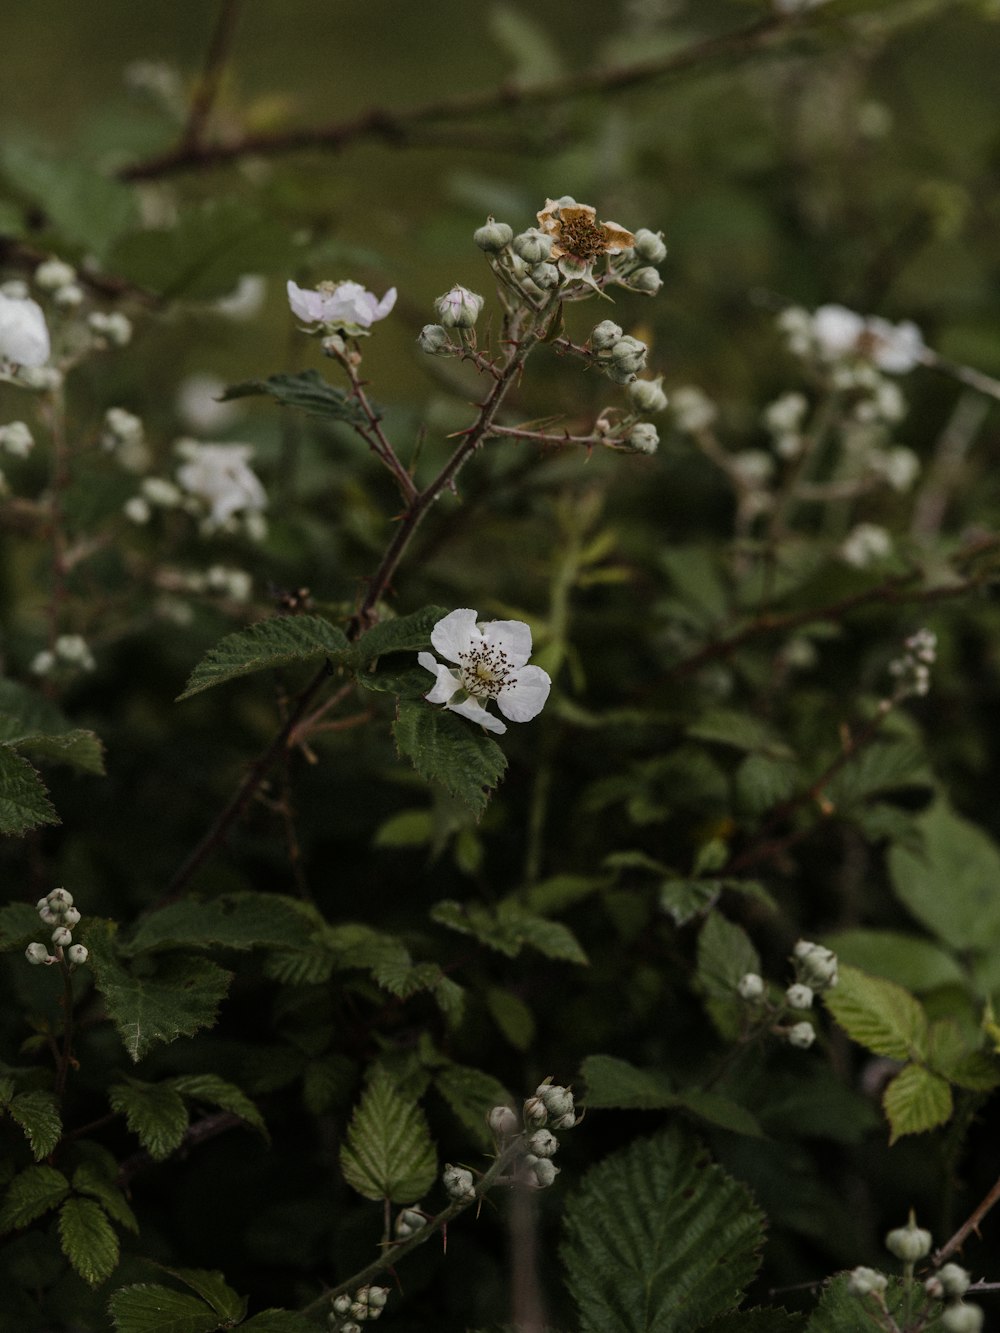 Small White Flowers Growing In Forest. Wildflowers In Summer. Stock Photo,  Picture and Royalty Free Image. Image 60230537.